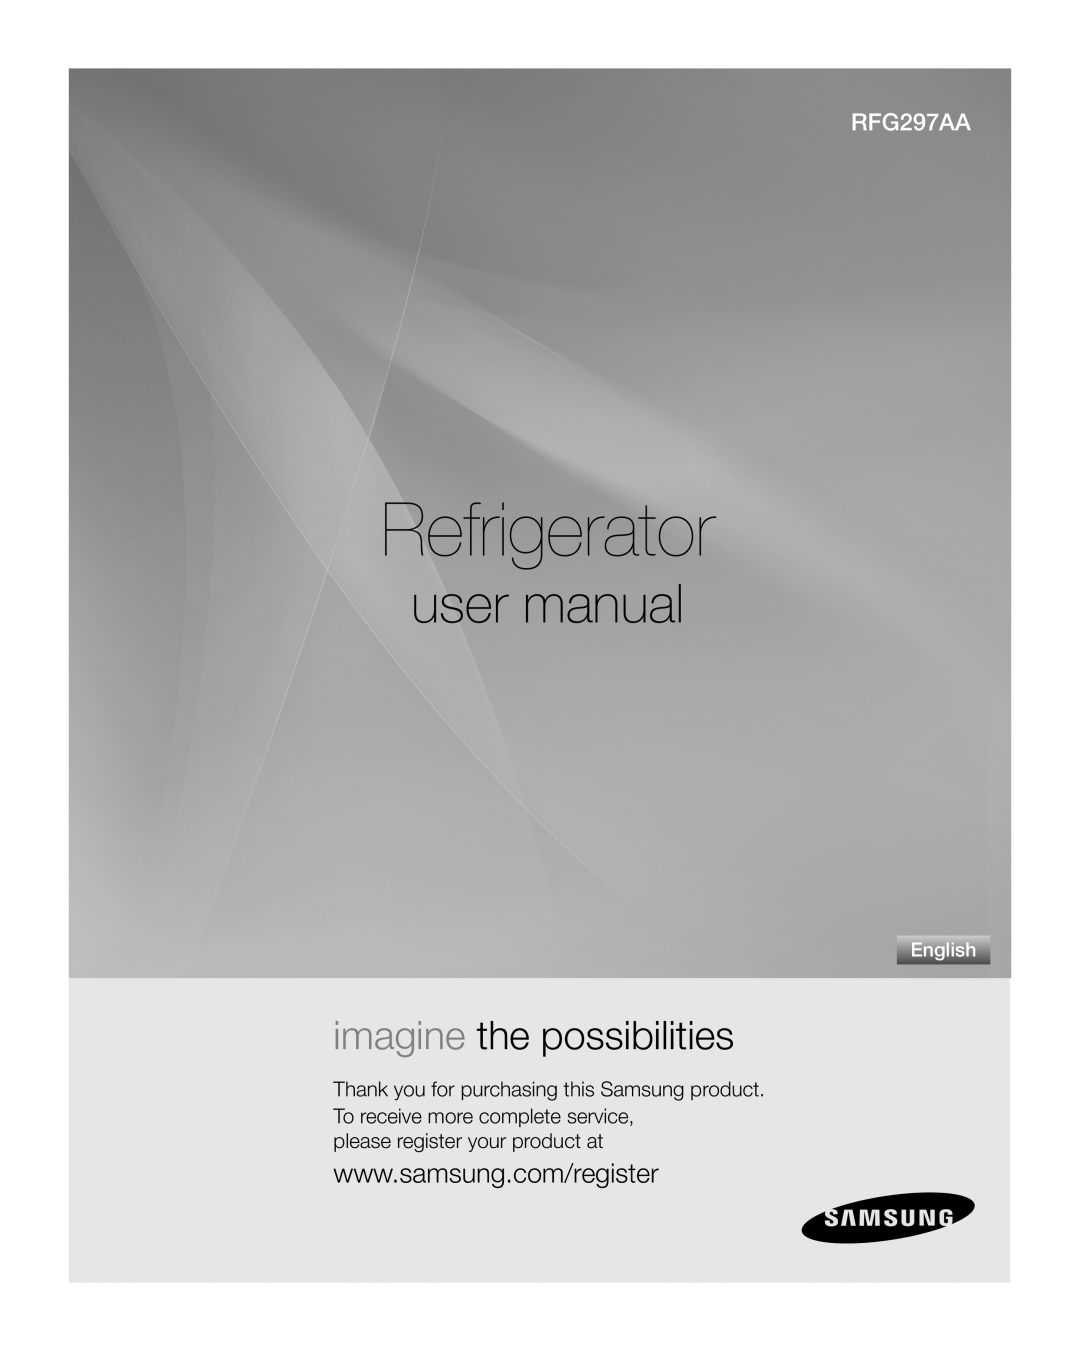 Samsung RFG297AAWP user manual Refrigerator, imagine the possibilities, please register your product at, English 